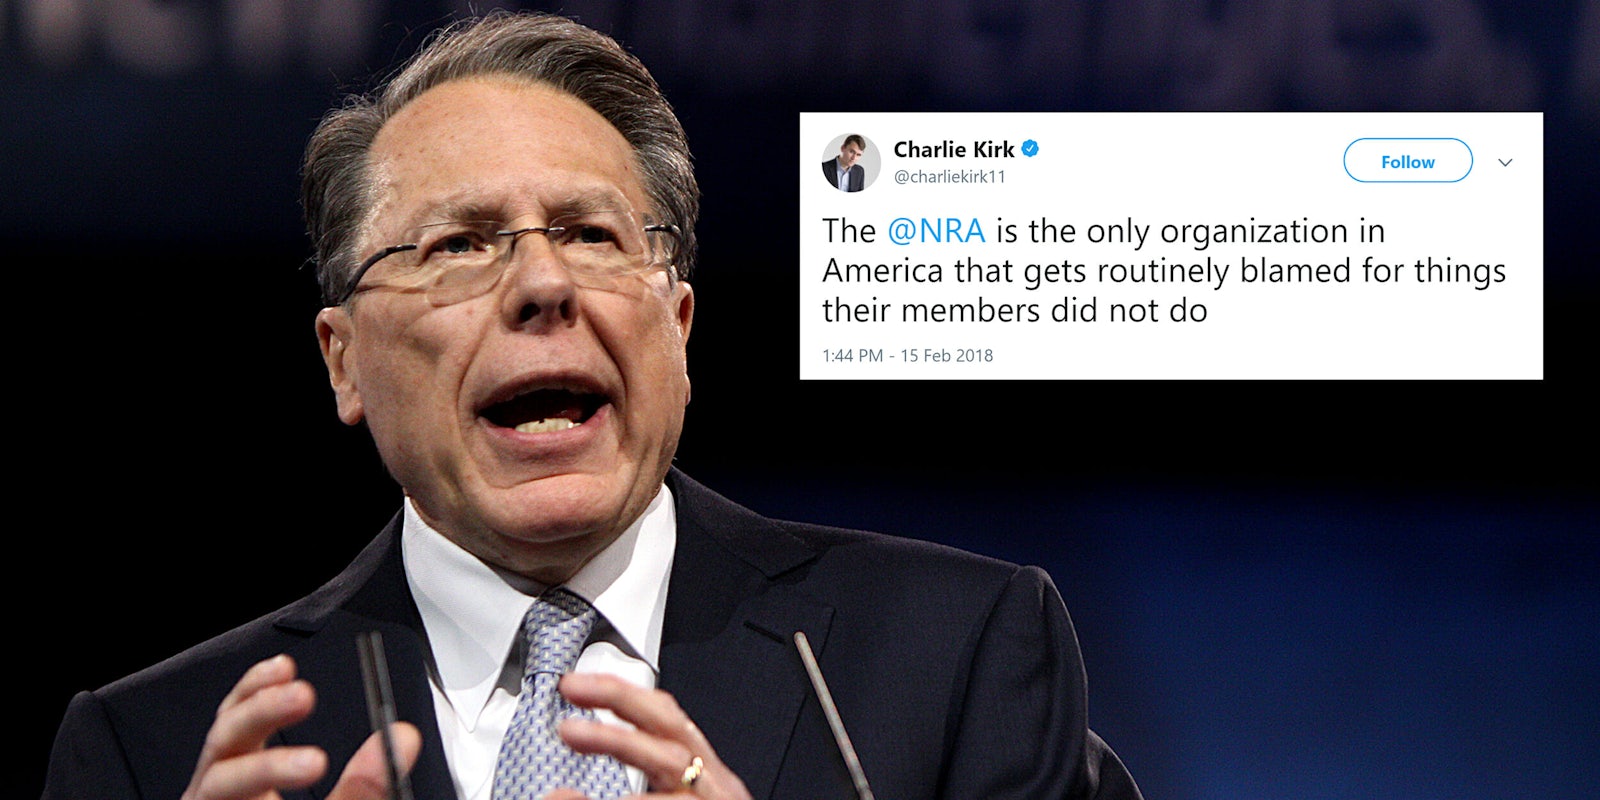 Wayne LaPierre with Charlie Kirk tweet that reads 'The @NRA is the only organization in America that gets routinely blamed for things their members did not do'